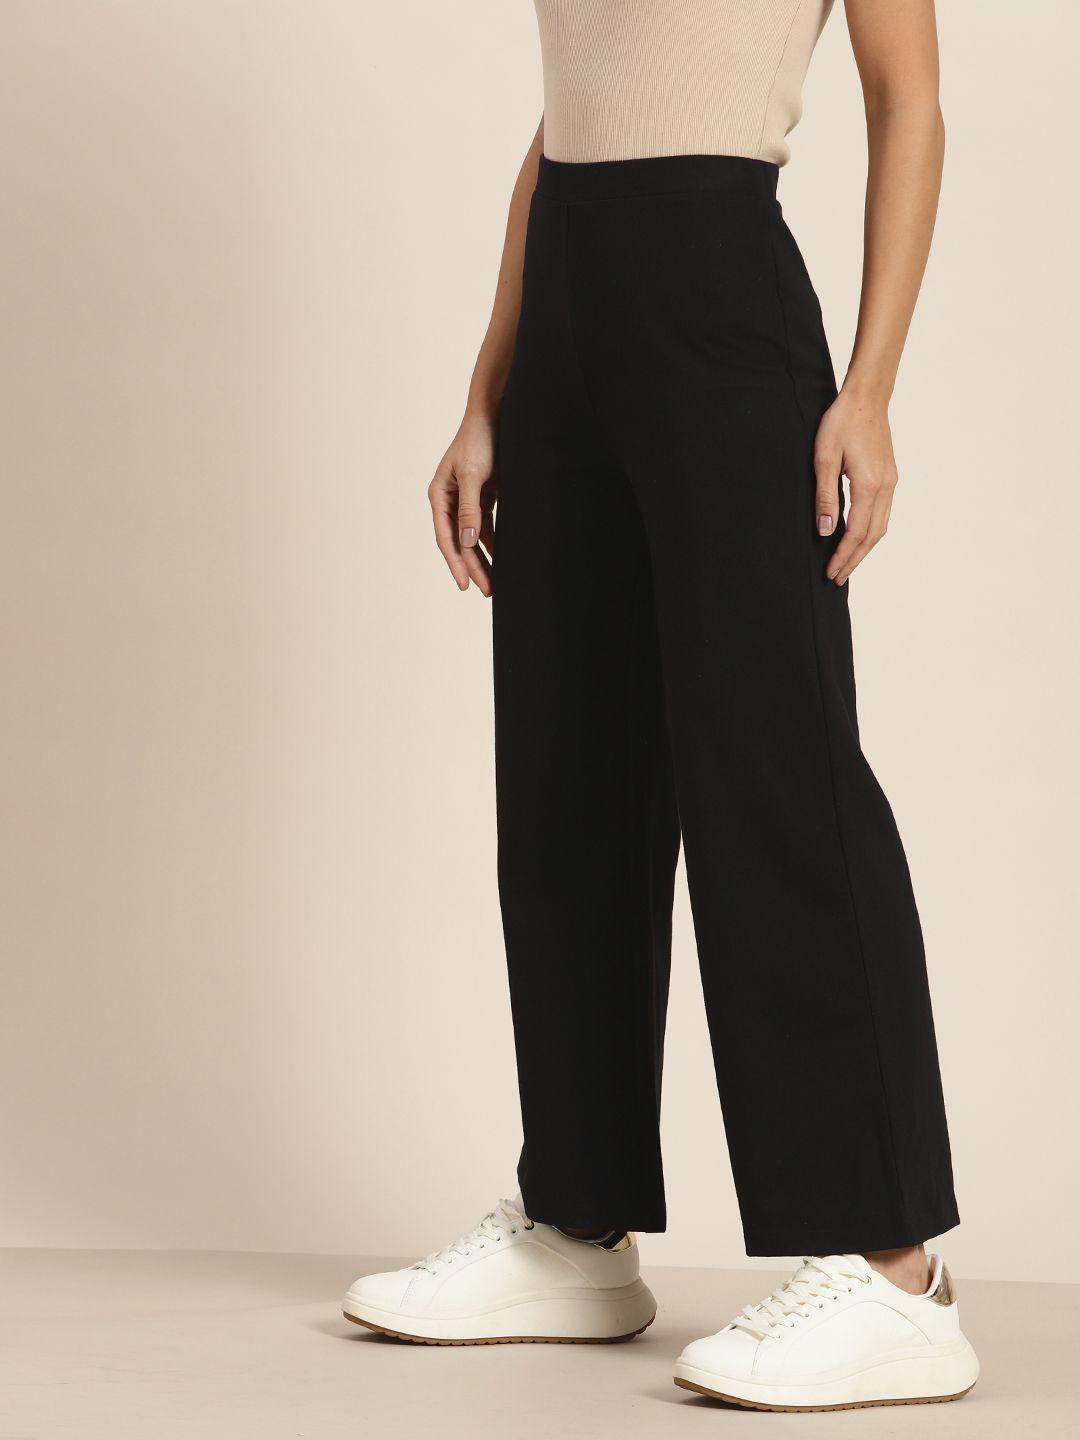 her by invictus women solid bootcut track pants